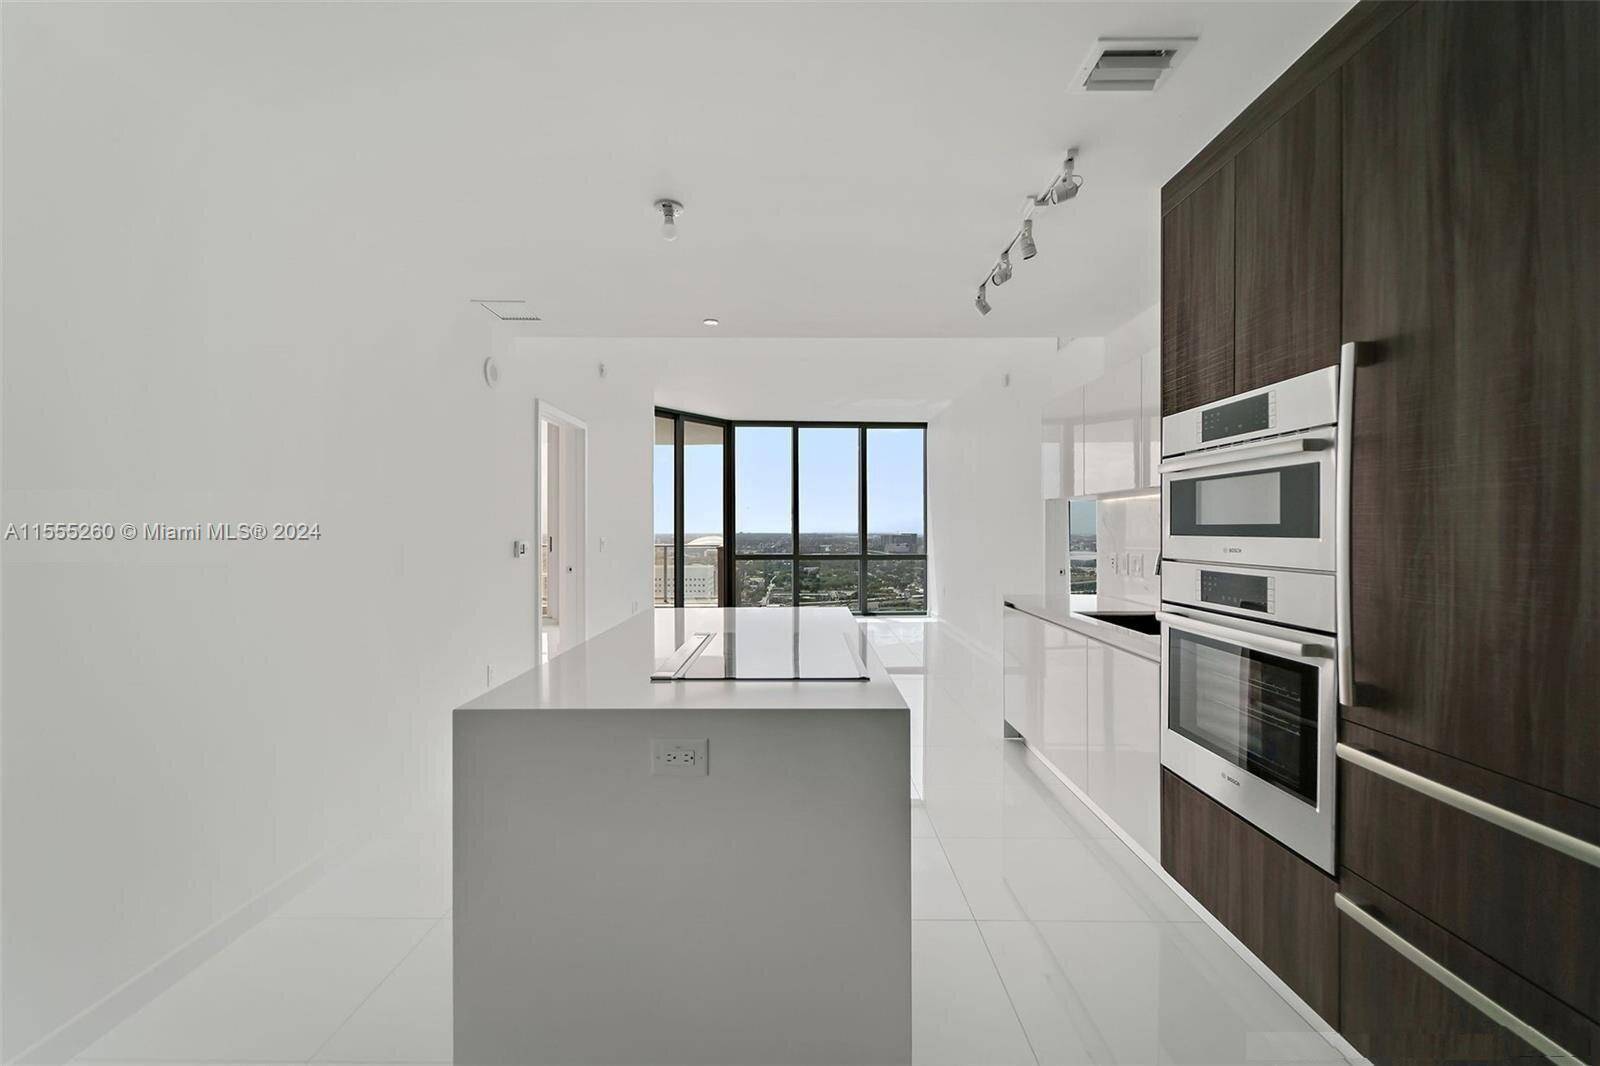 Highly sought after unit on the 43rd floor at the new Paramount Miami World Center with City Views.